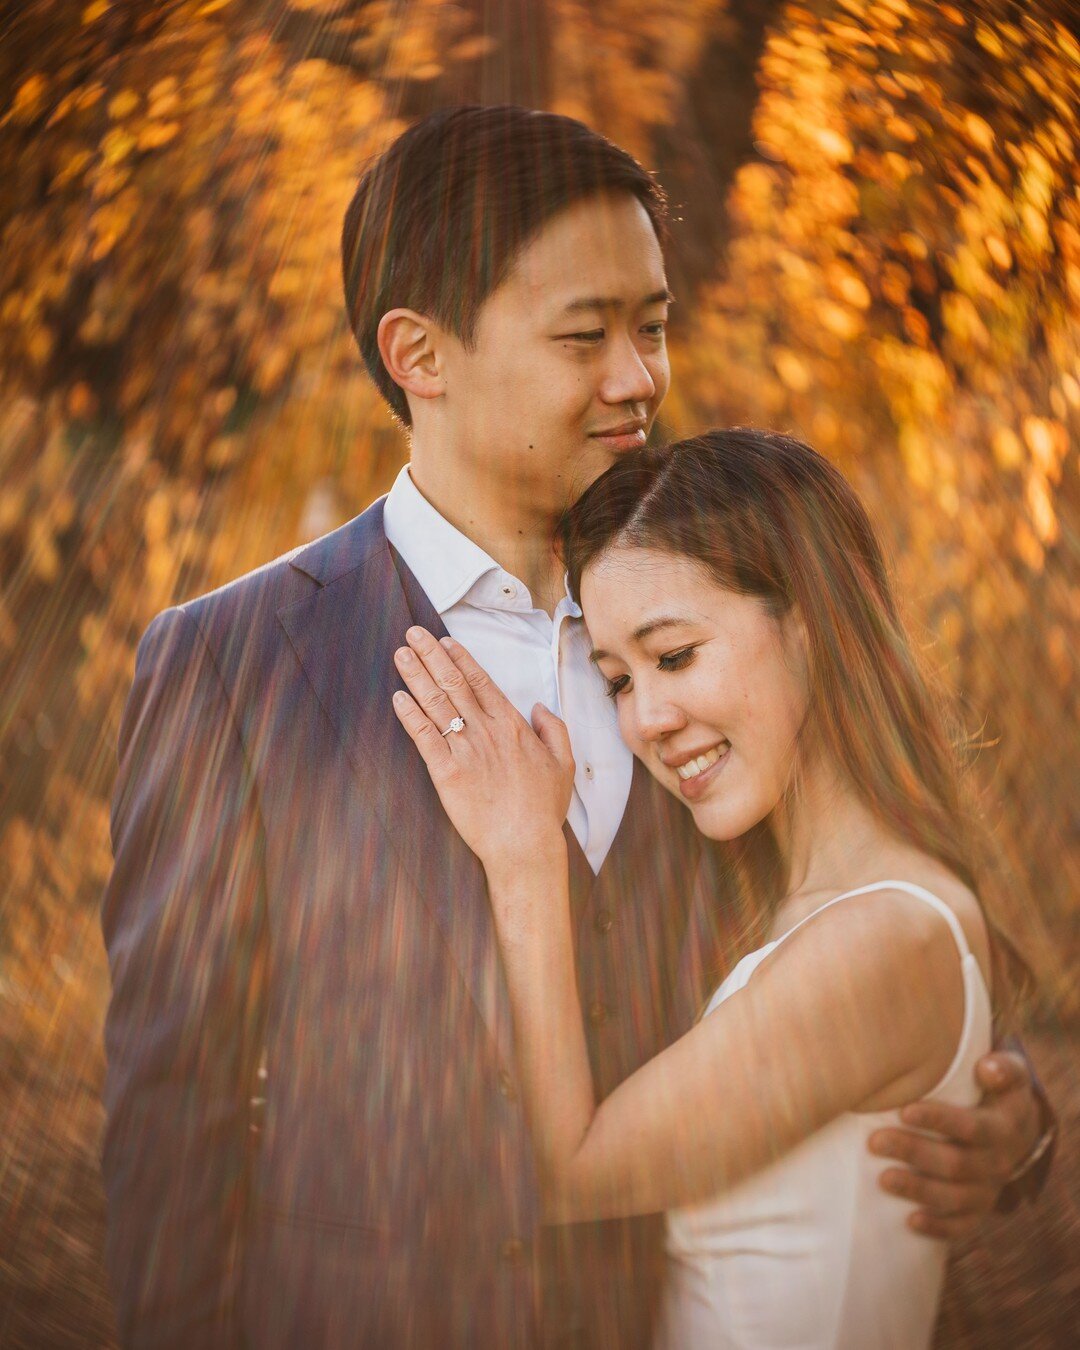 Golden hour at the public garden in Fall! A winning recipe.

#bostonpublicgarden #bostonpublicgardenengagement #bostonpublicgardenengagementsession #bostonengagement #bostonengagementphotographer #bostonengagementsession #bostonengagementphotos #bost